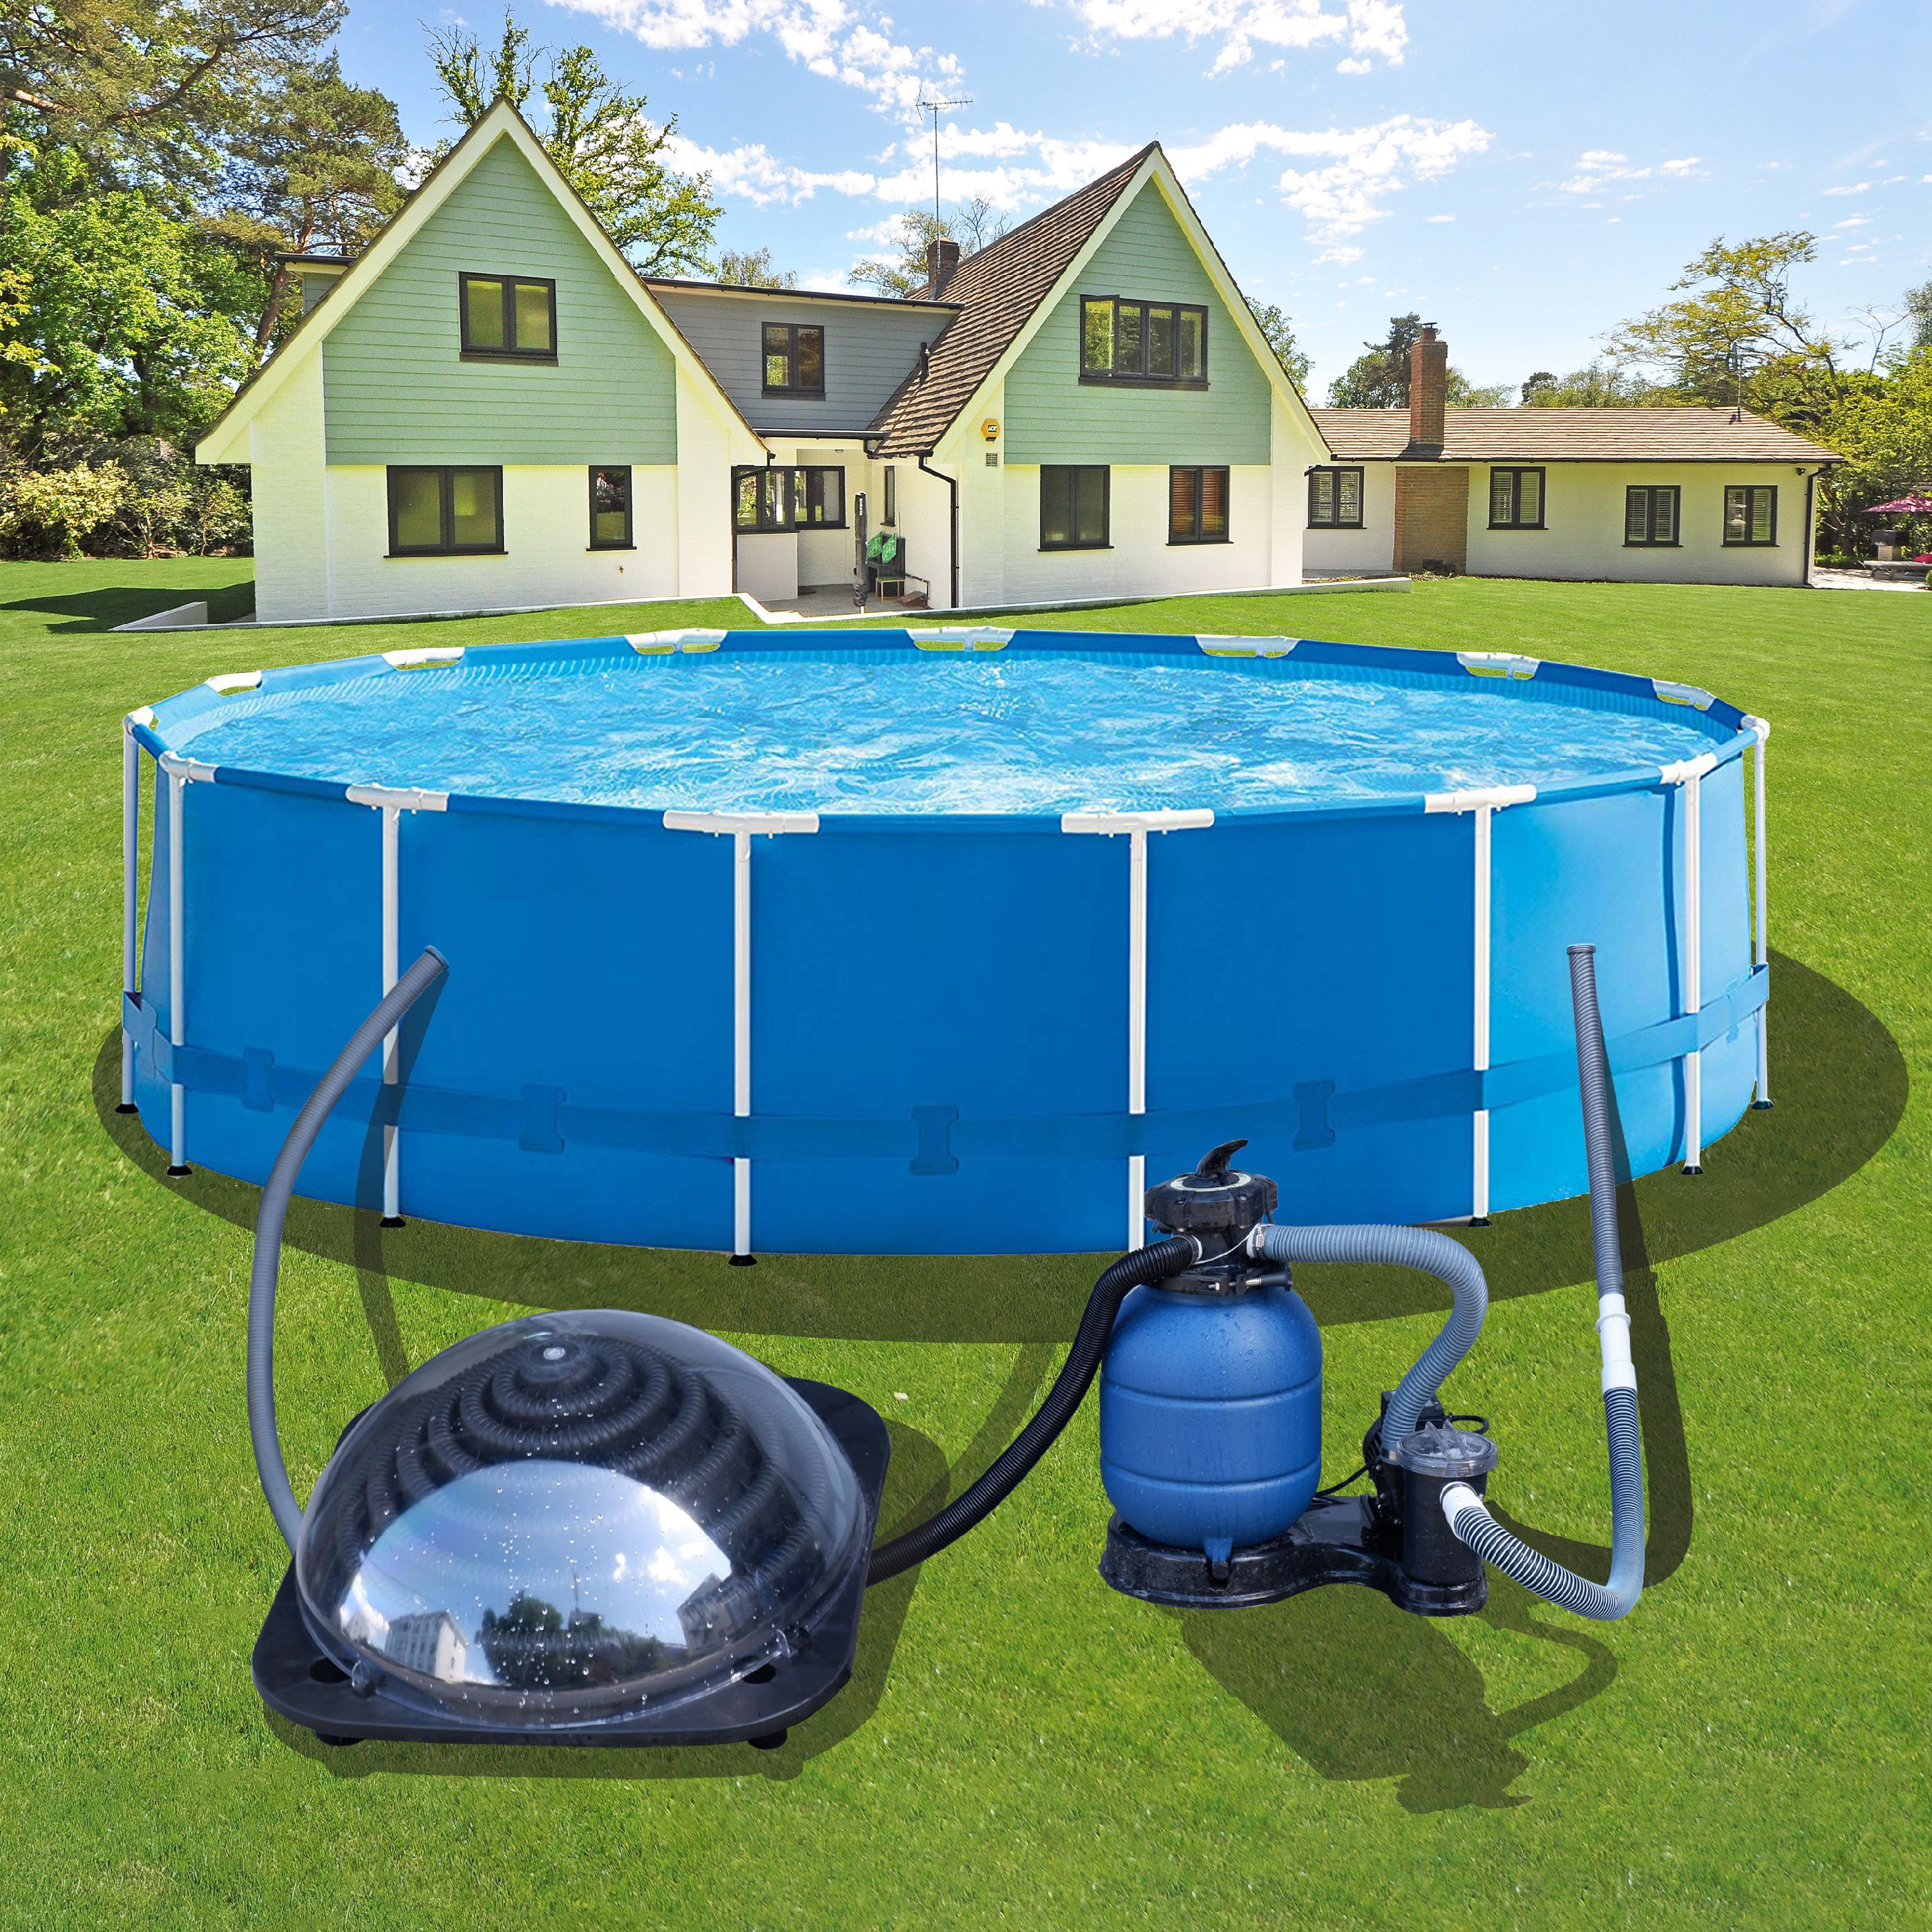 What Kinds of Pools Can Use a Heat Pump Pool Heater